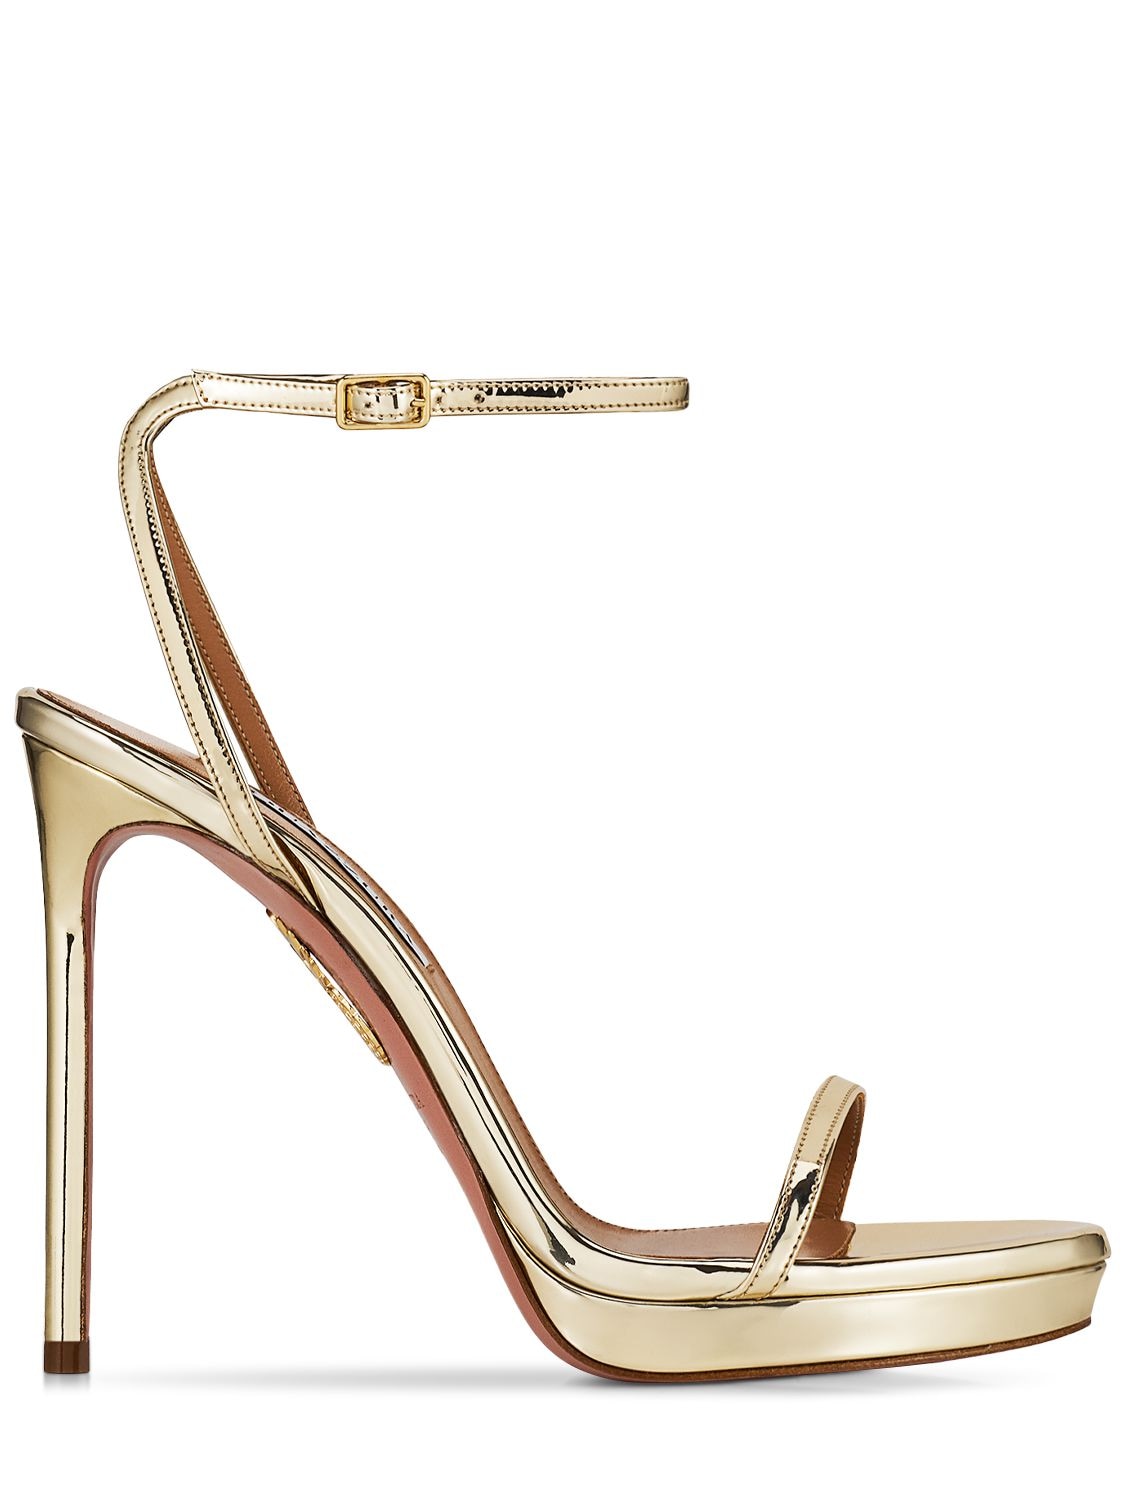 Aquazzura 115mm Olie Faux Leather Sandals In Gold